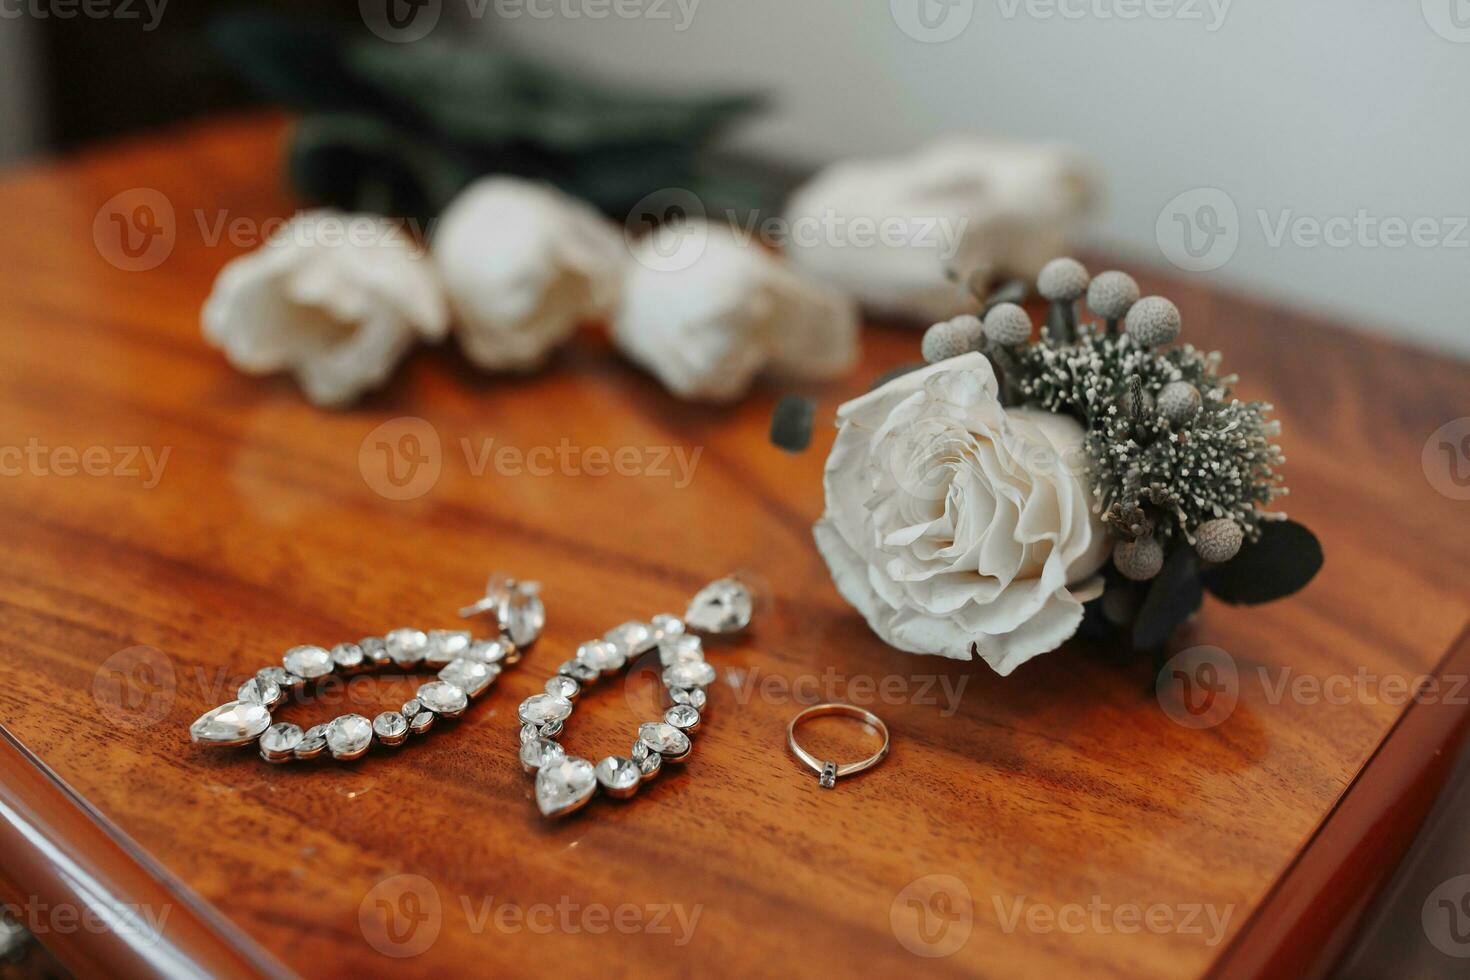 Photo of details at the wedding. Wedding ring with diamond and bride's earrings, boutonniere stands on wooden background. Beautiful light. Fashion and style